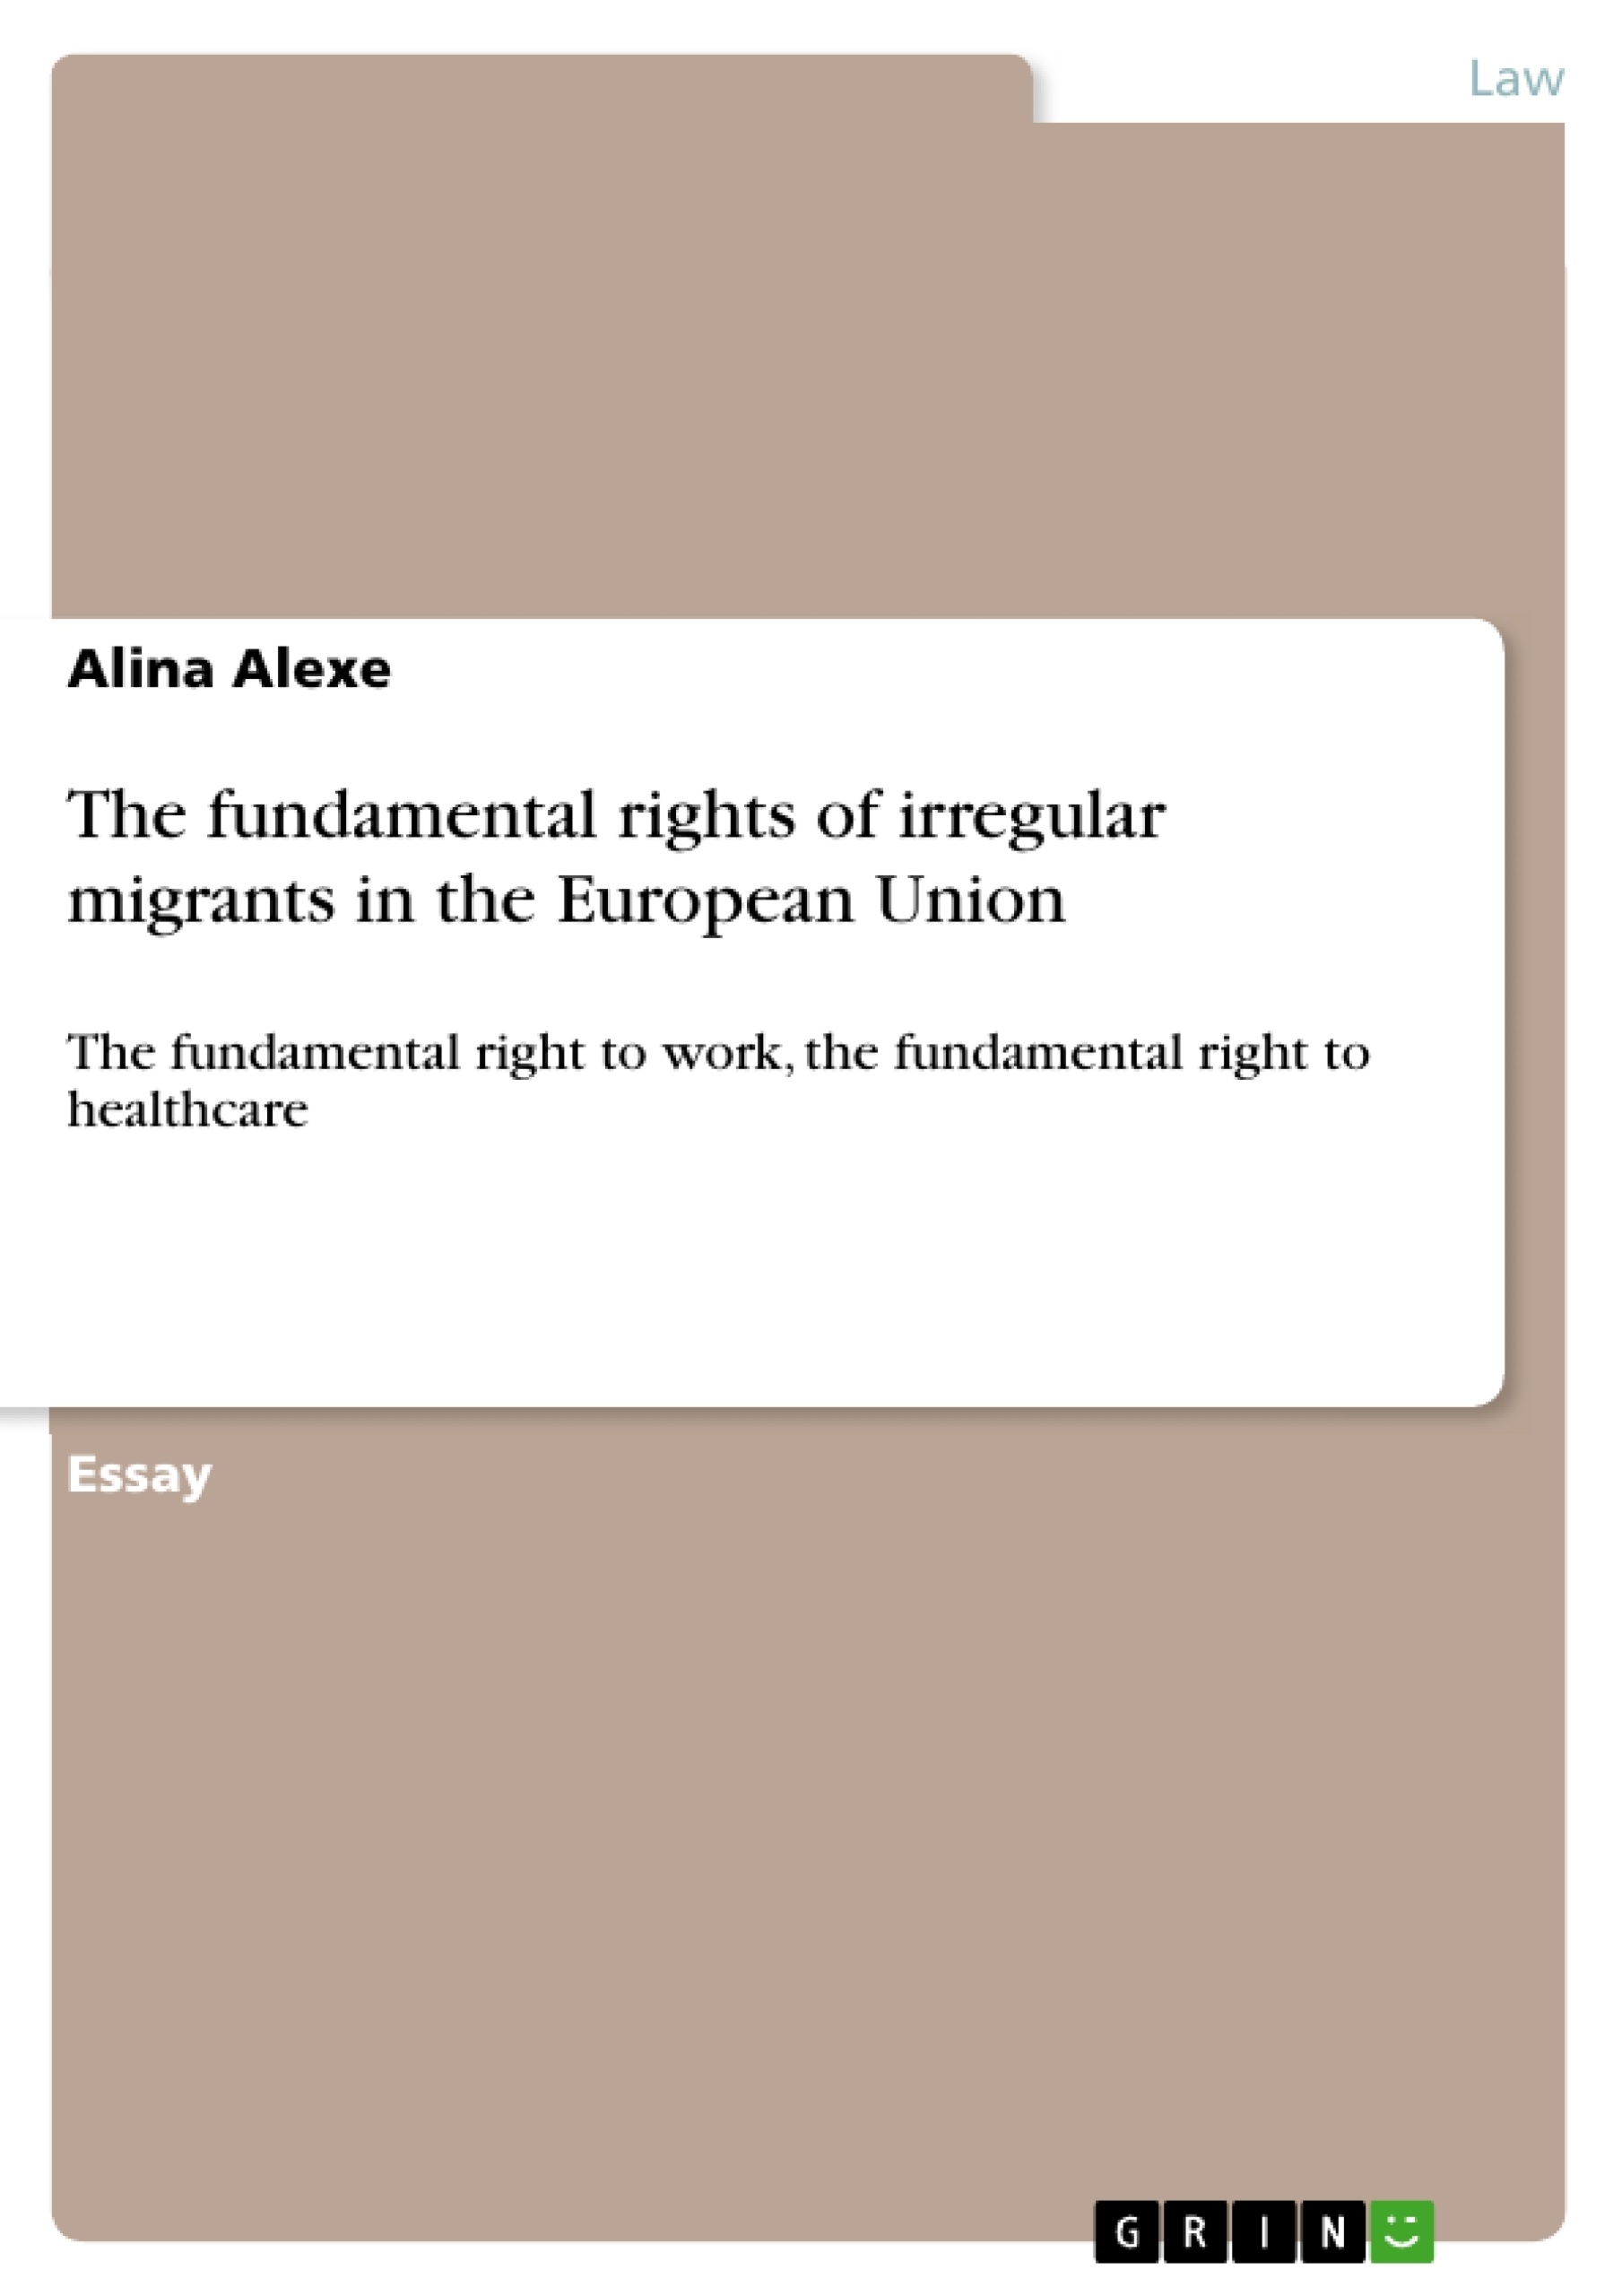 Title: The fundamental rights of irregular migrants in the European Union